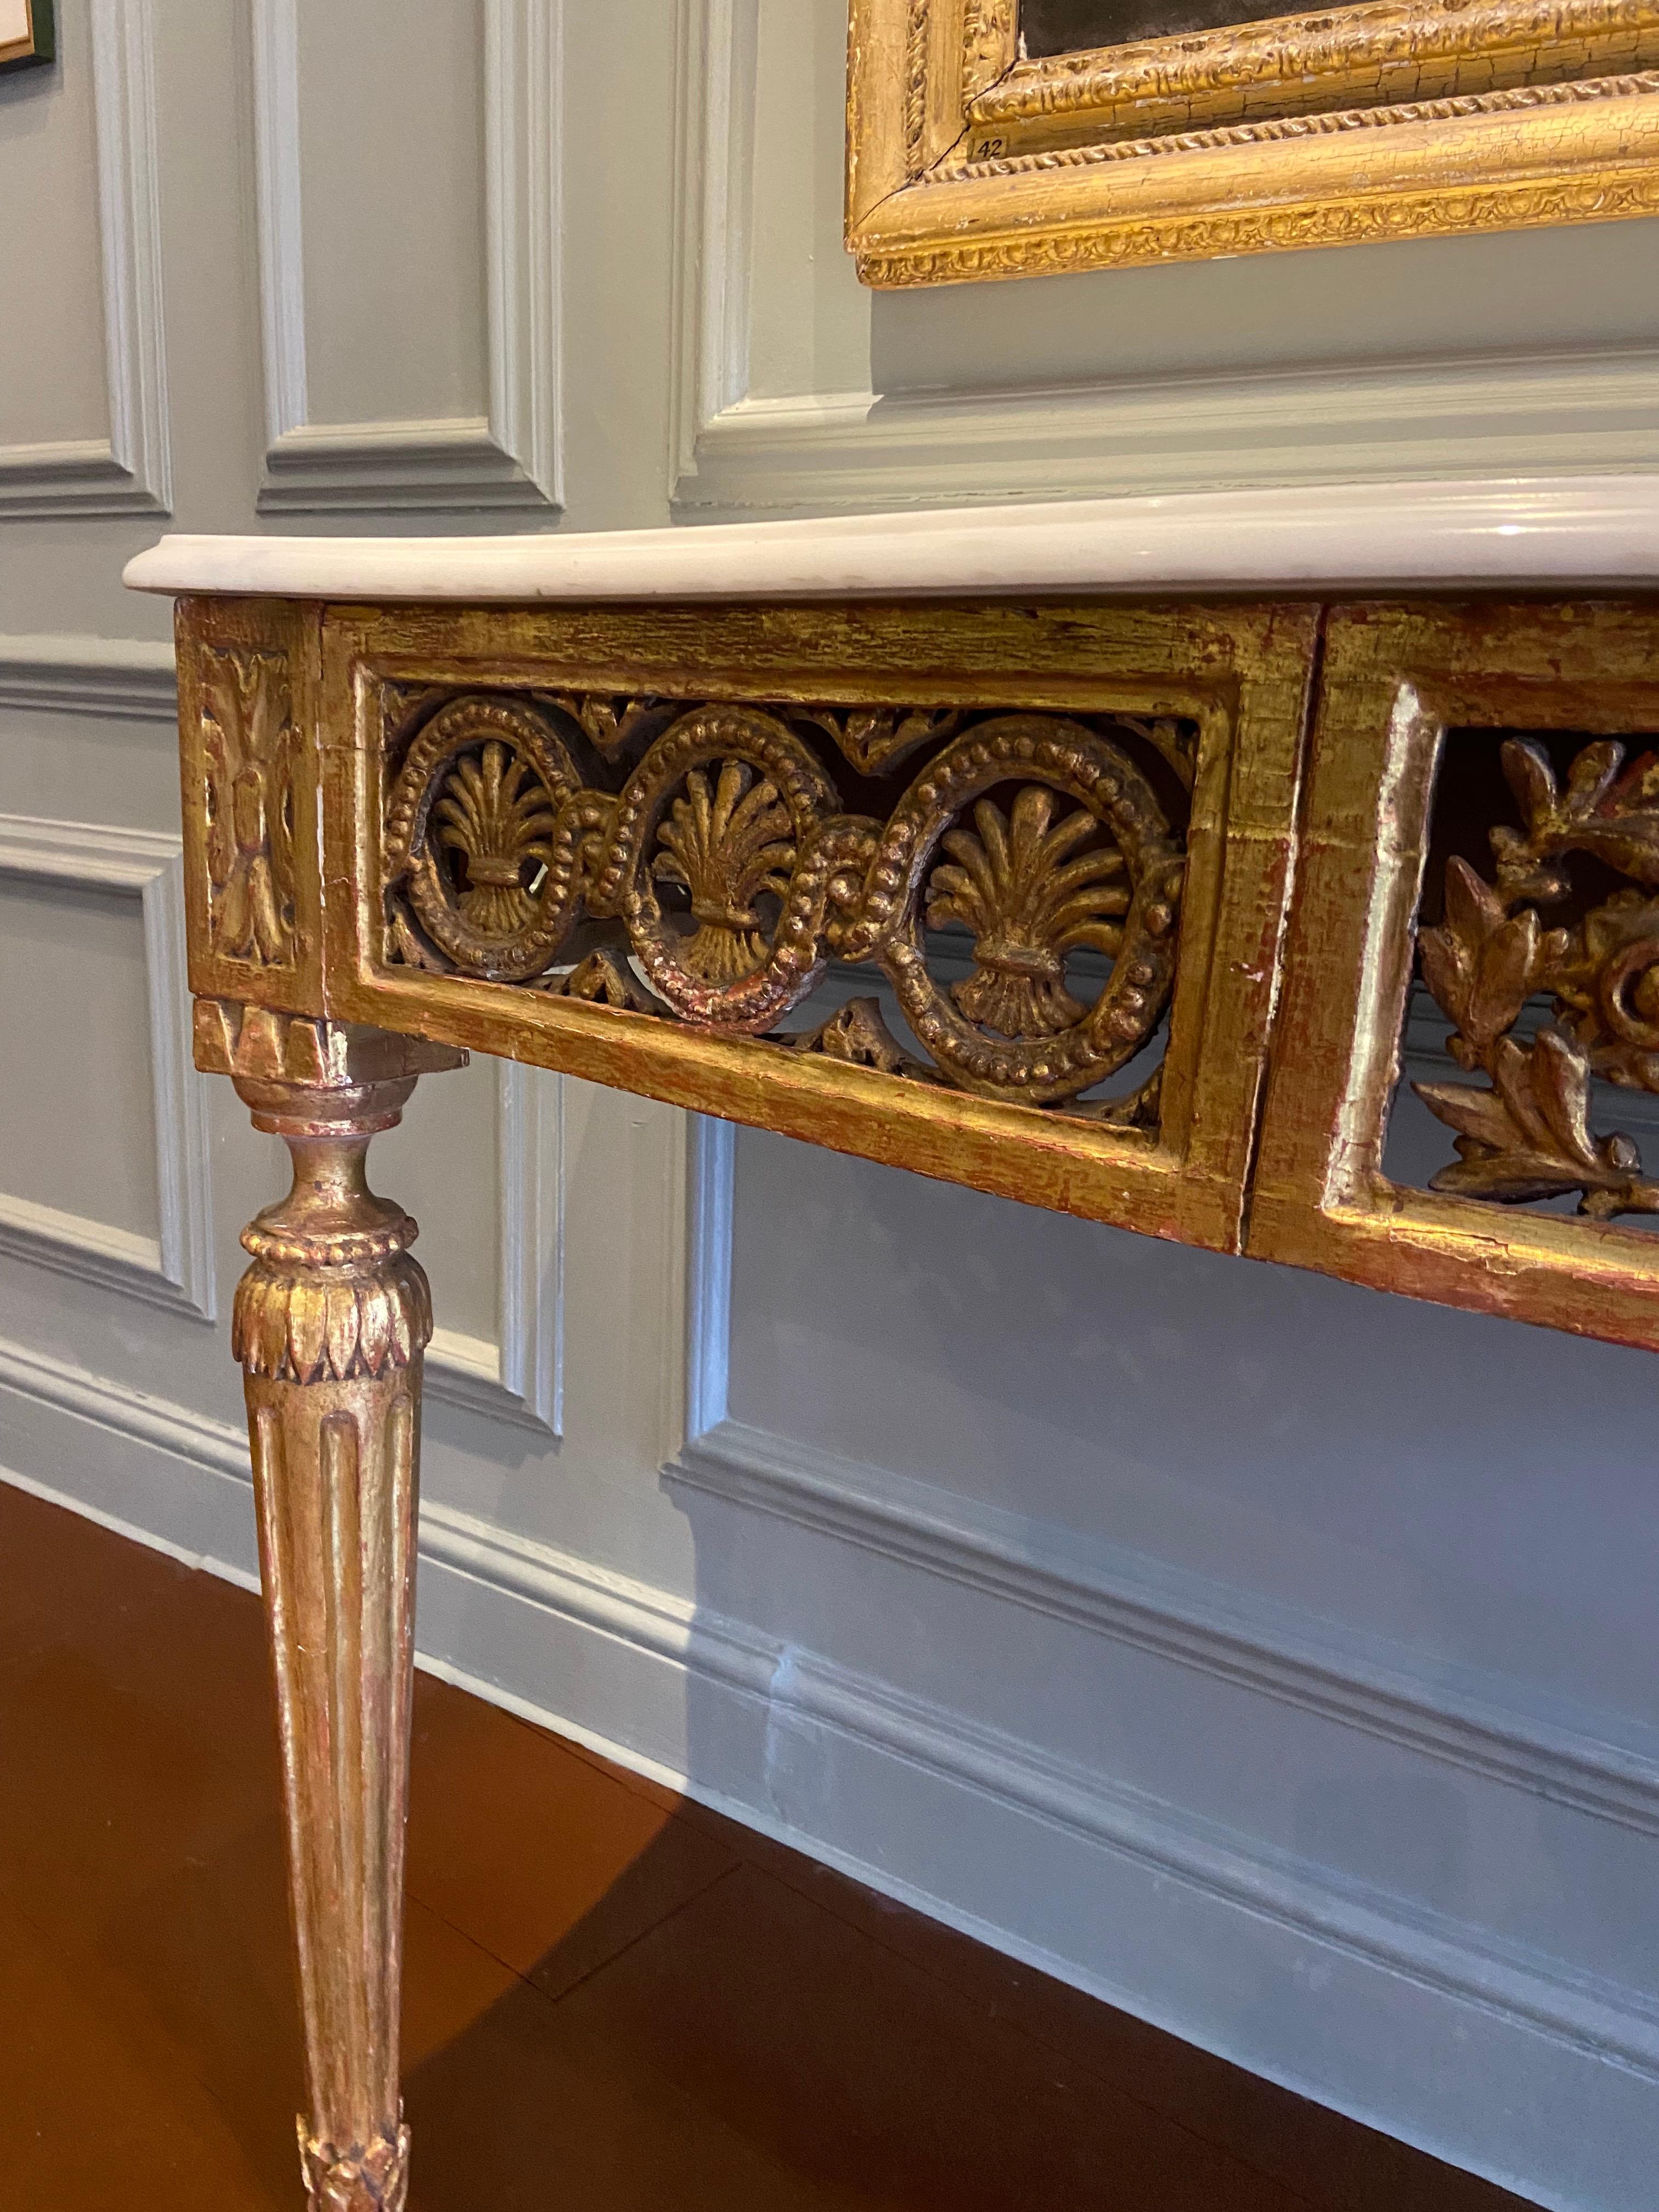 Northern Italian Serpentine Carved Gilt-Wood Console Table 'Late 18th Century' For Sale 4